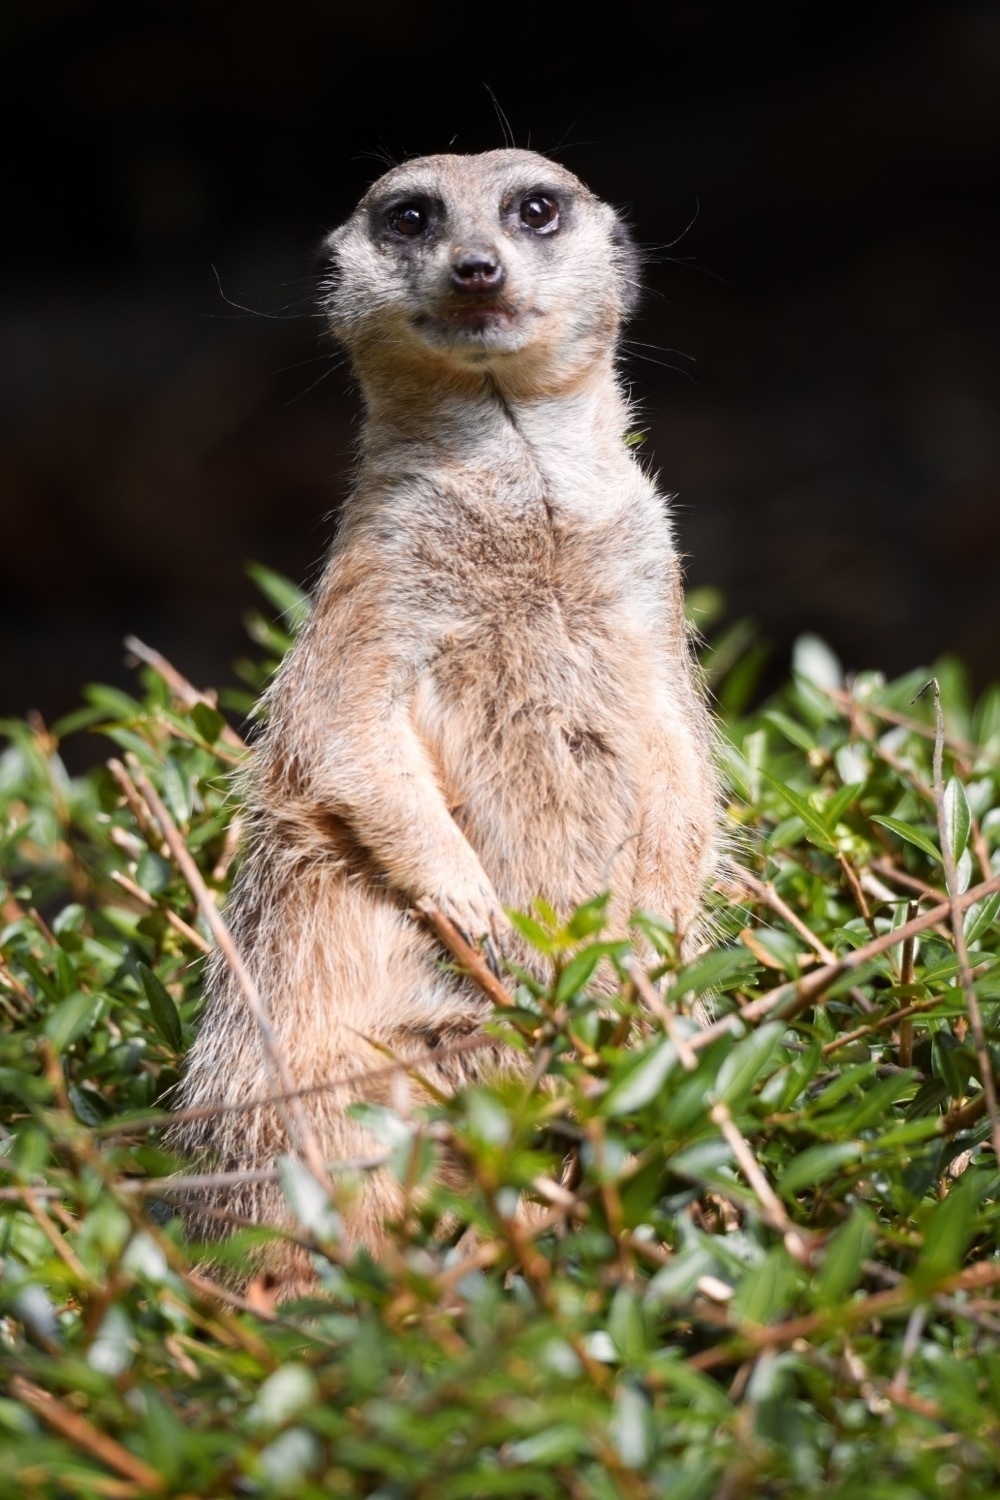 A standing meerkat looking into the camera